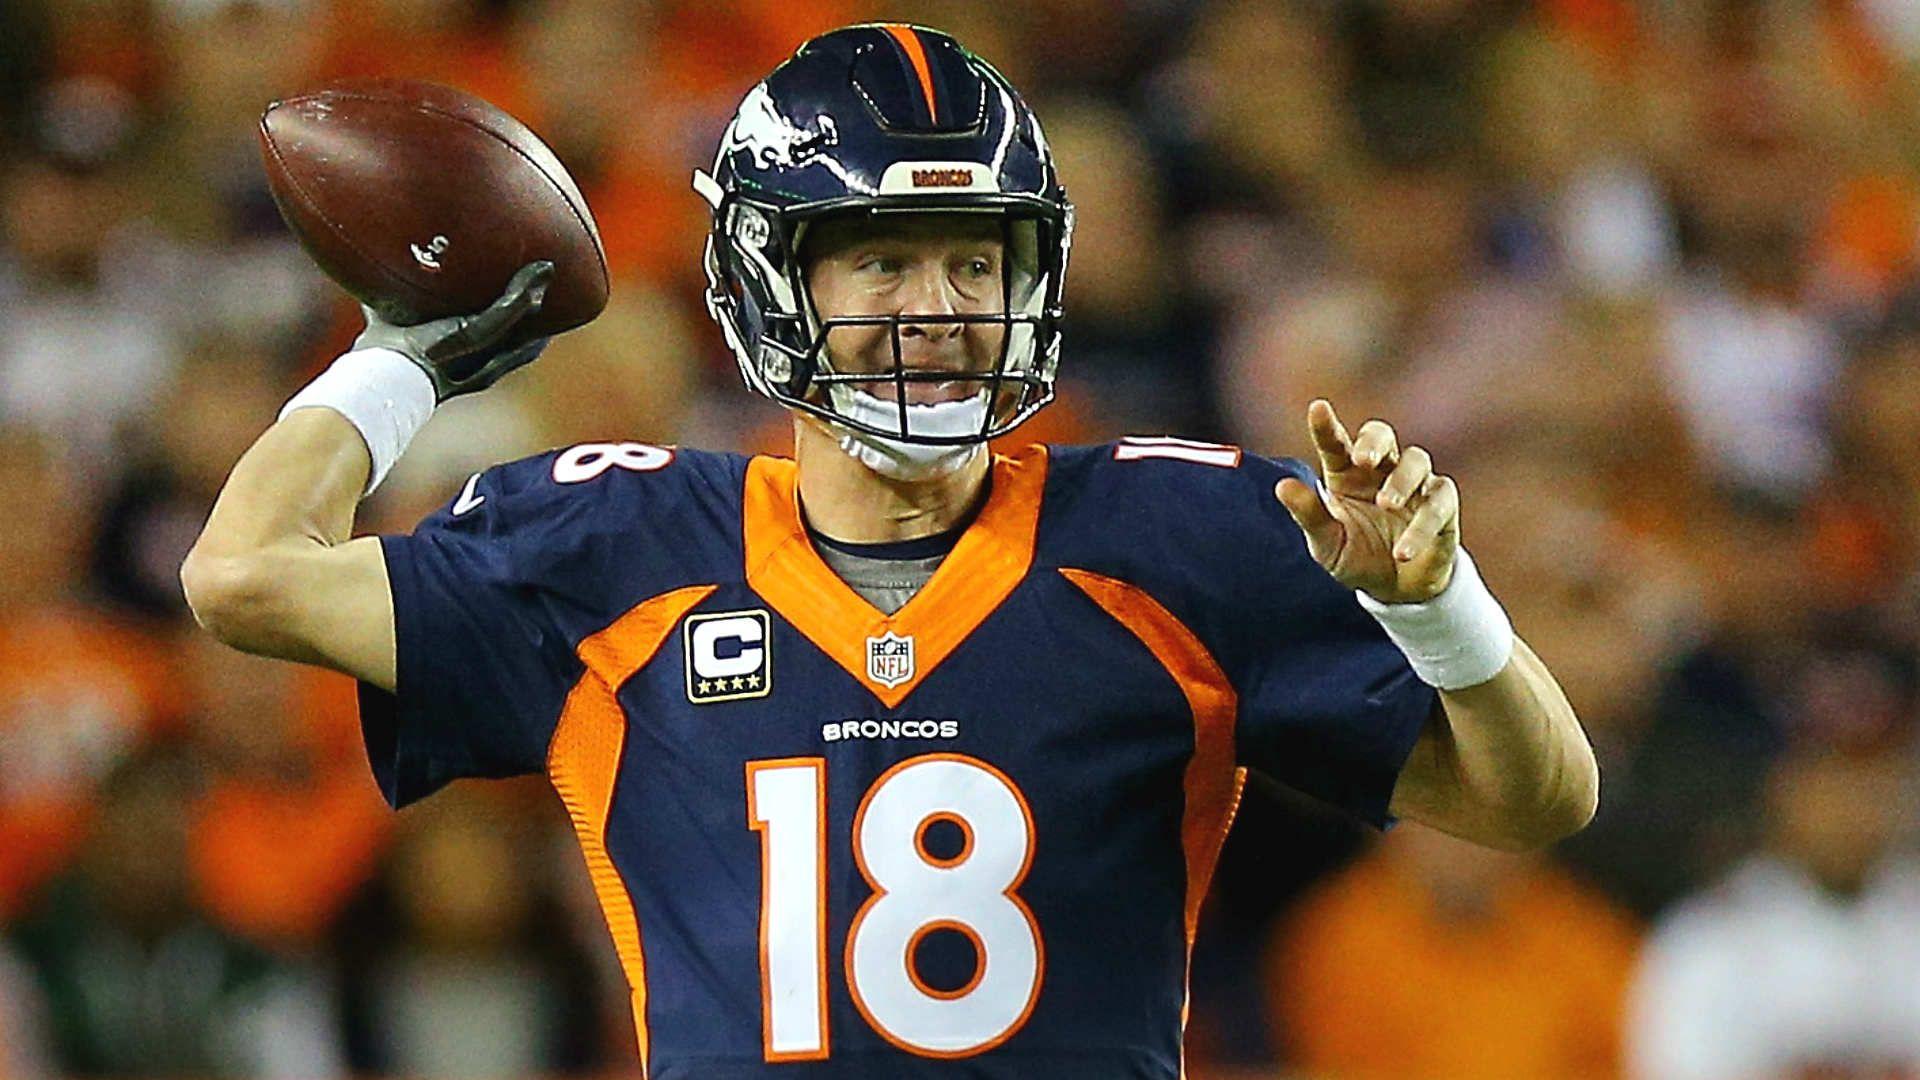 Peyton Manning intends to play in even if he's not